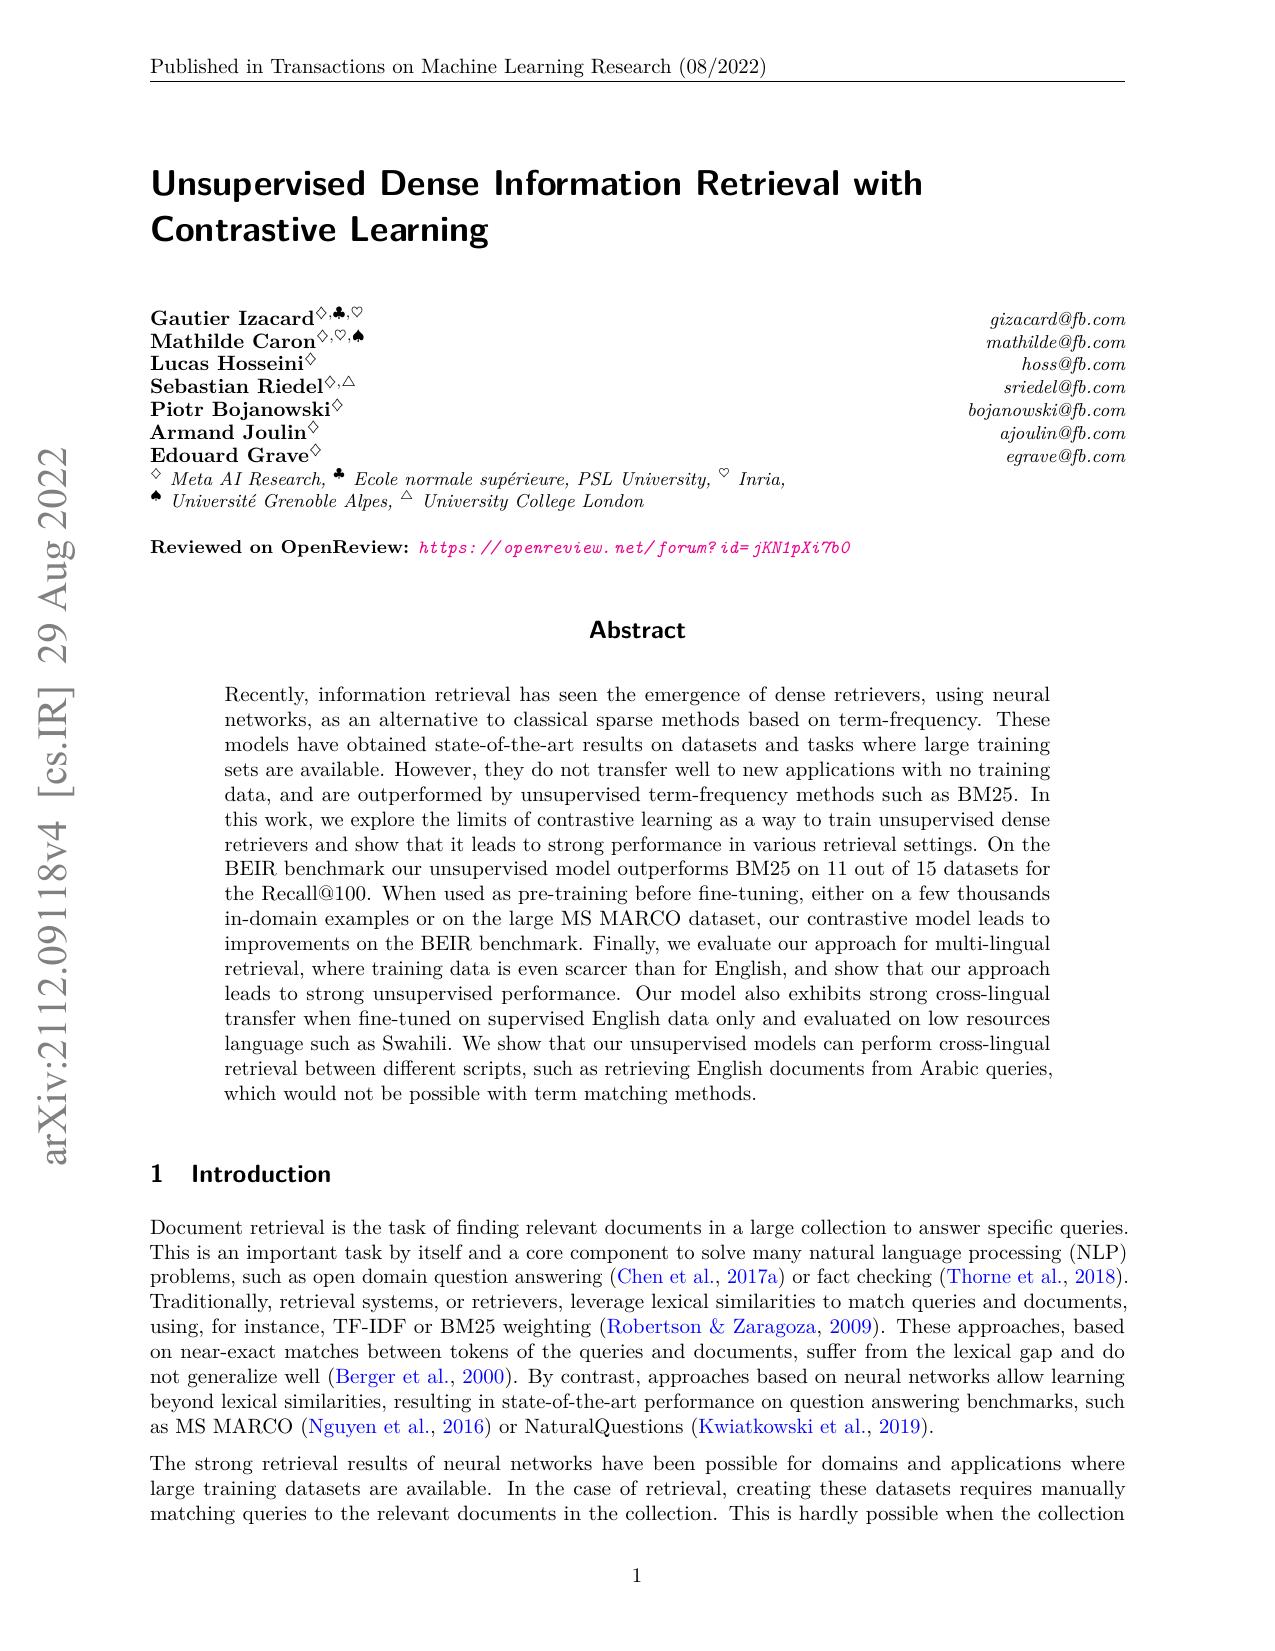 Unsupervised Dense Information Retrieval with Contrastive Learning